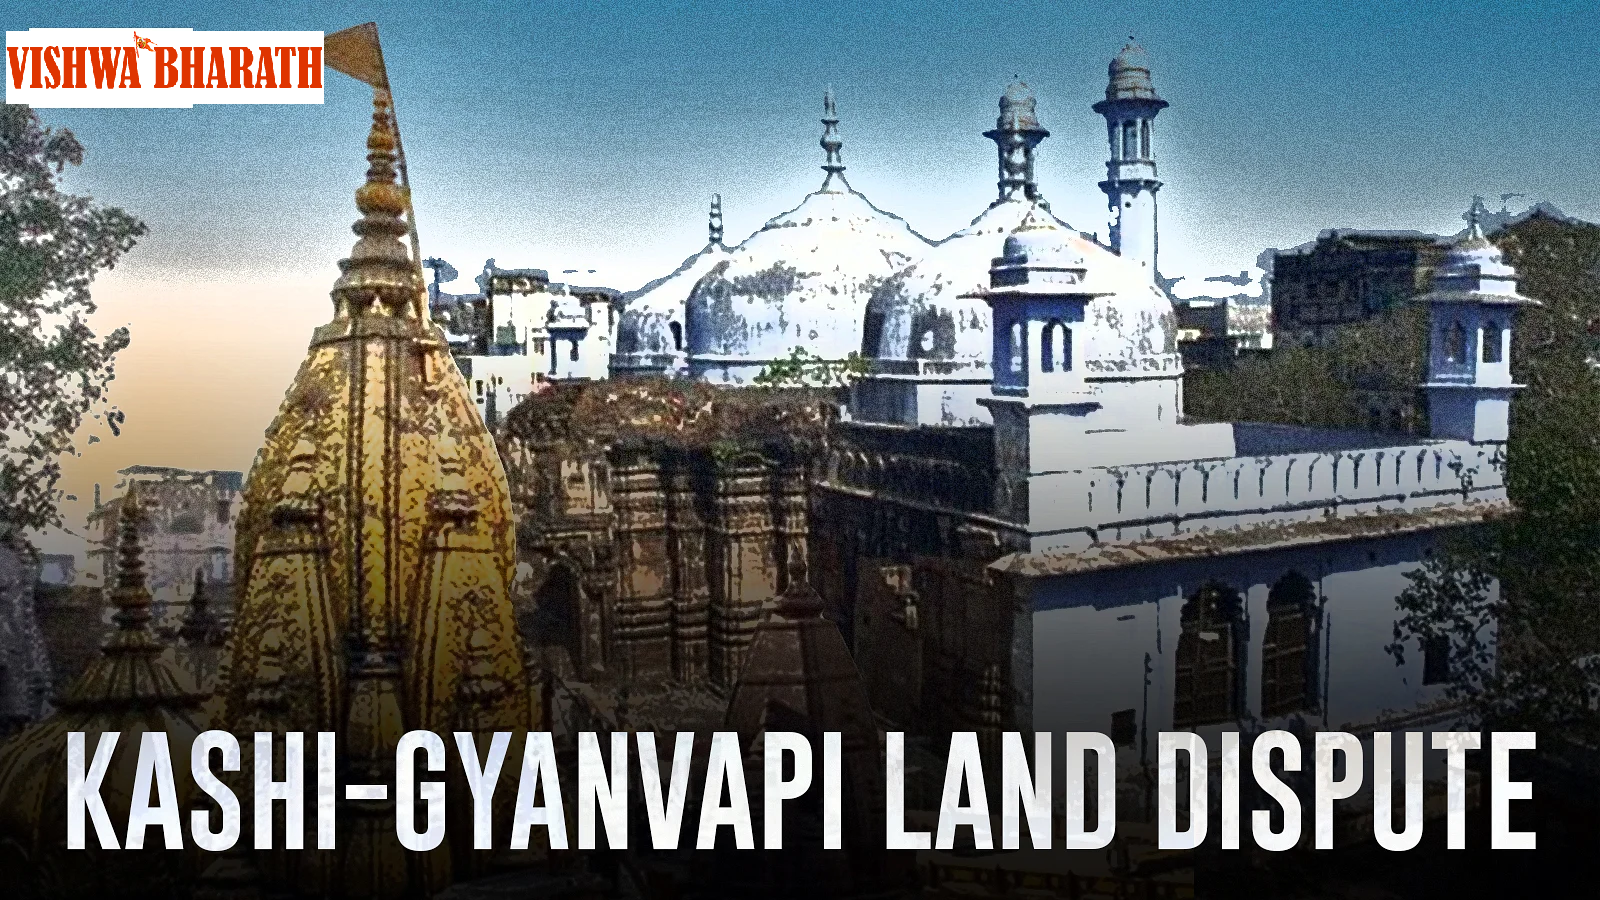 Big win for Hindu petitioners, UP Court says to finish Survey of Gyanvapi Mosque within May 17.